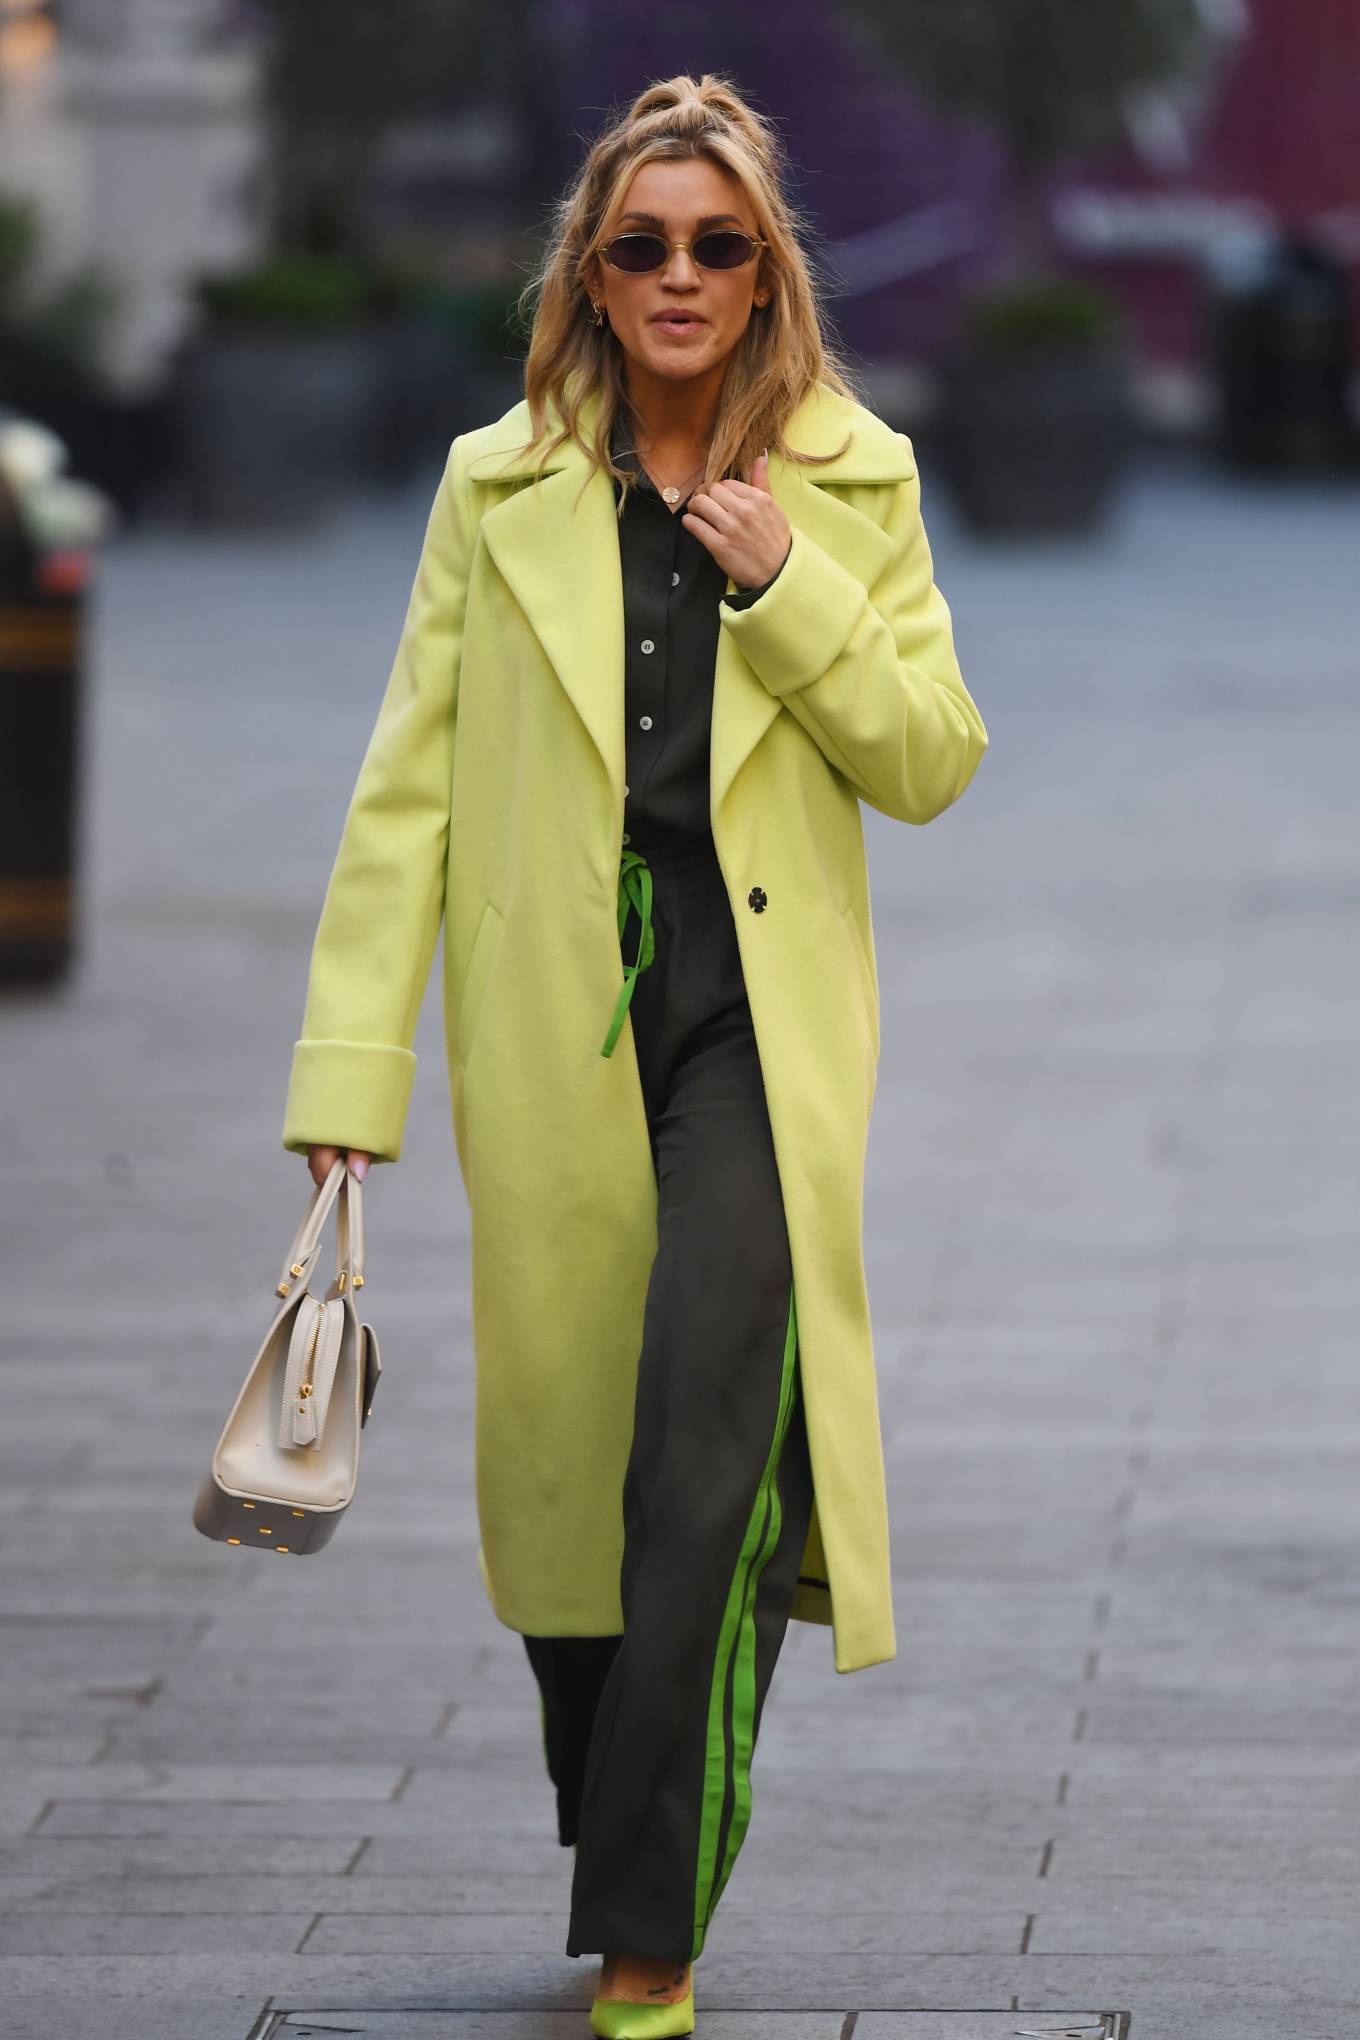 Ashley Roberts 2021 : Ashley Roberts – In a lime green trench coat at Heart radio in London-23